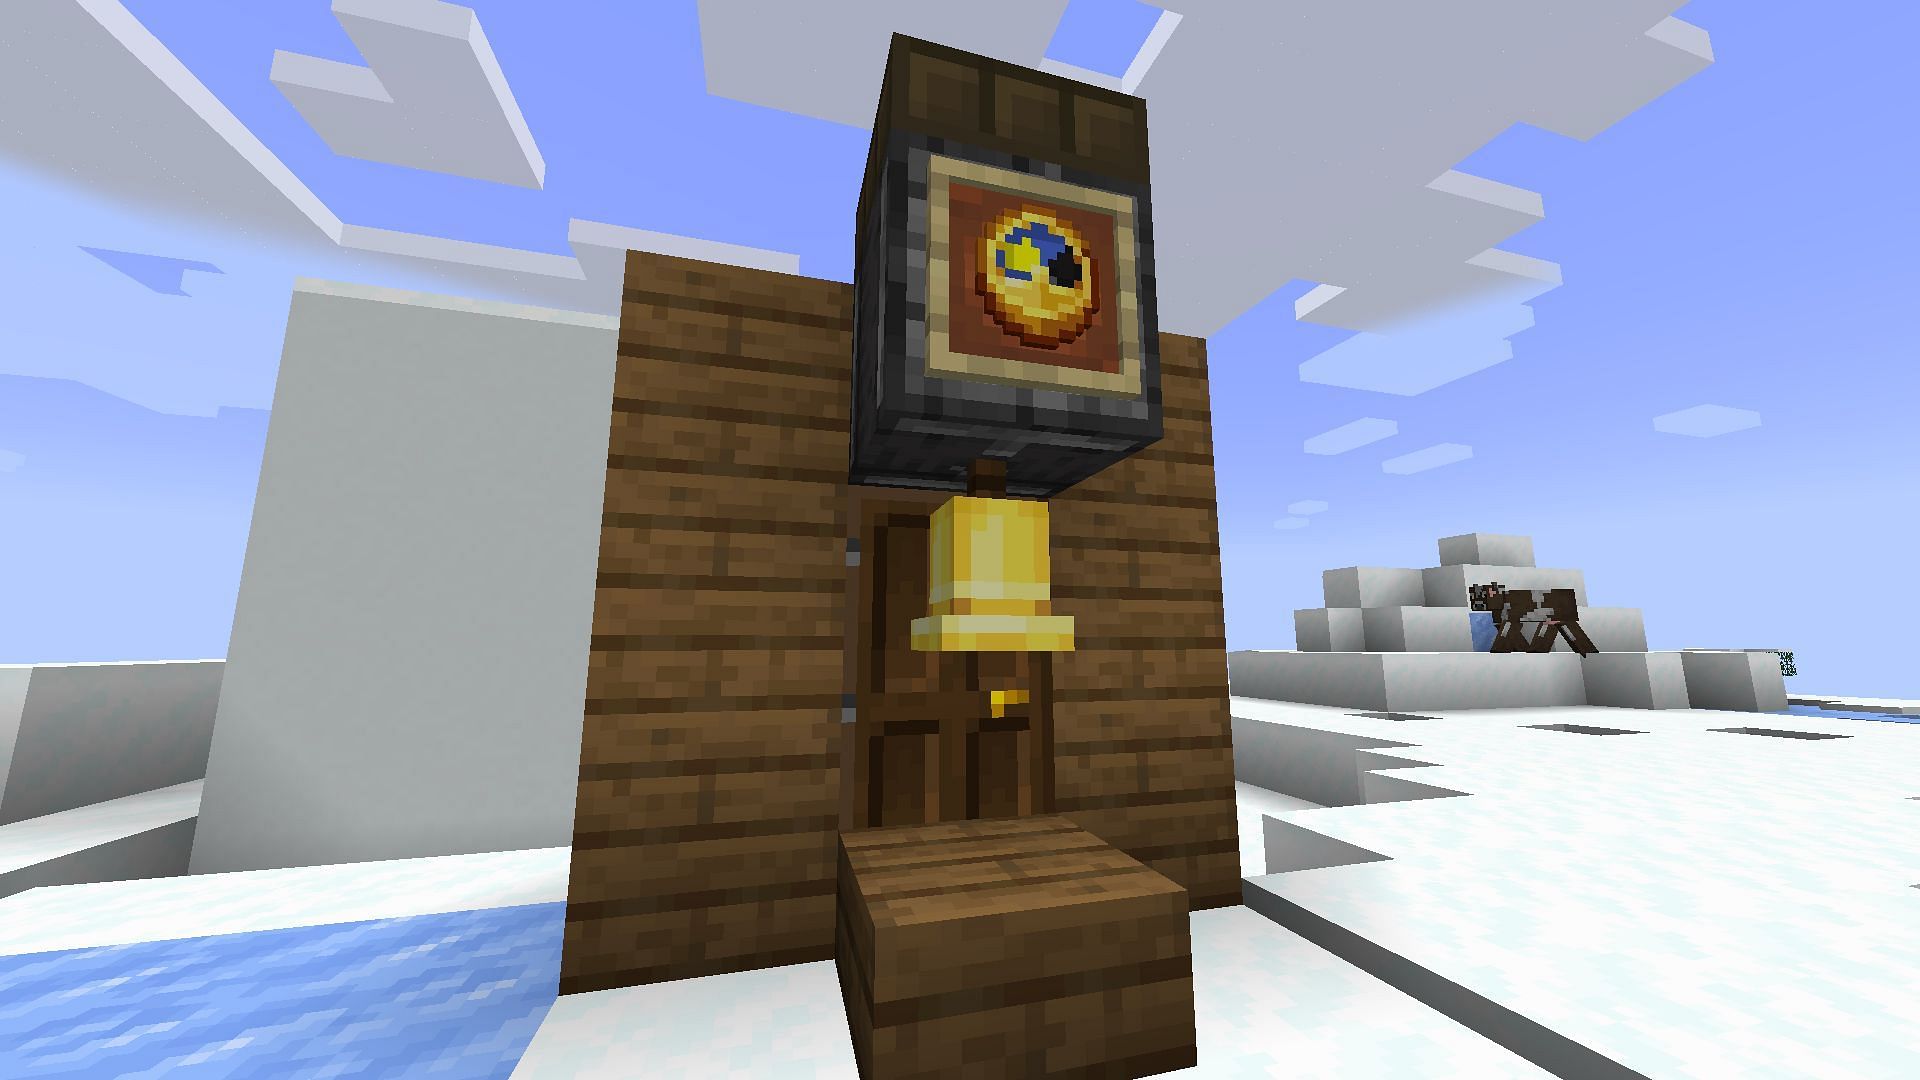 Place the bell below the observer block, this will ring as time progresses in a Minecraft world (Image via Mojang)